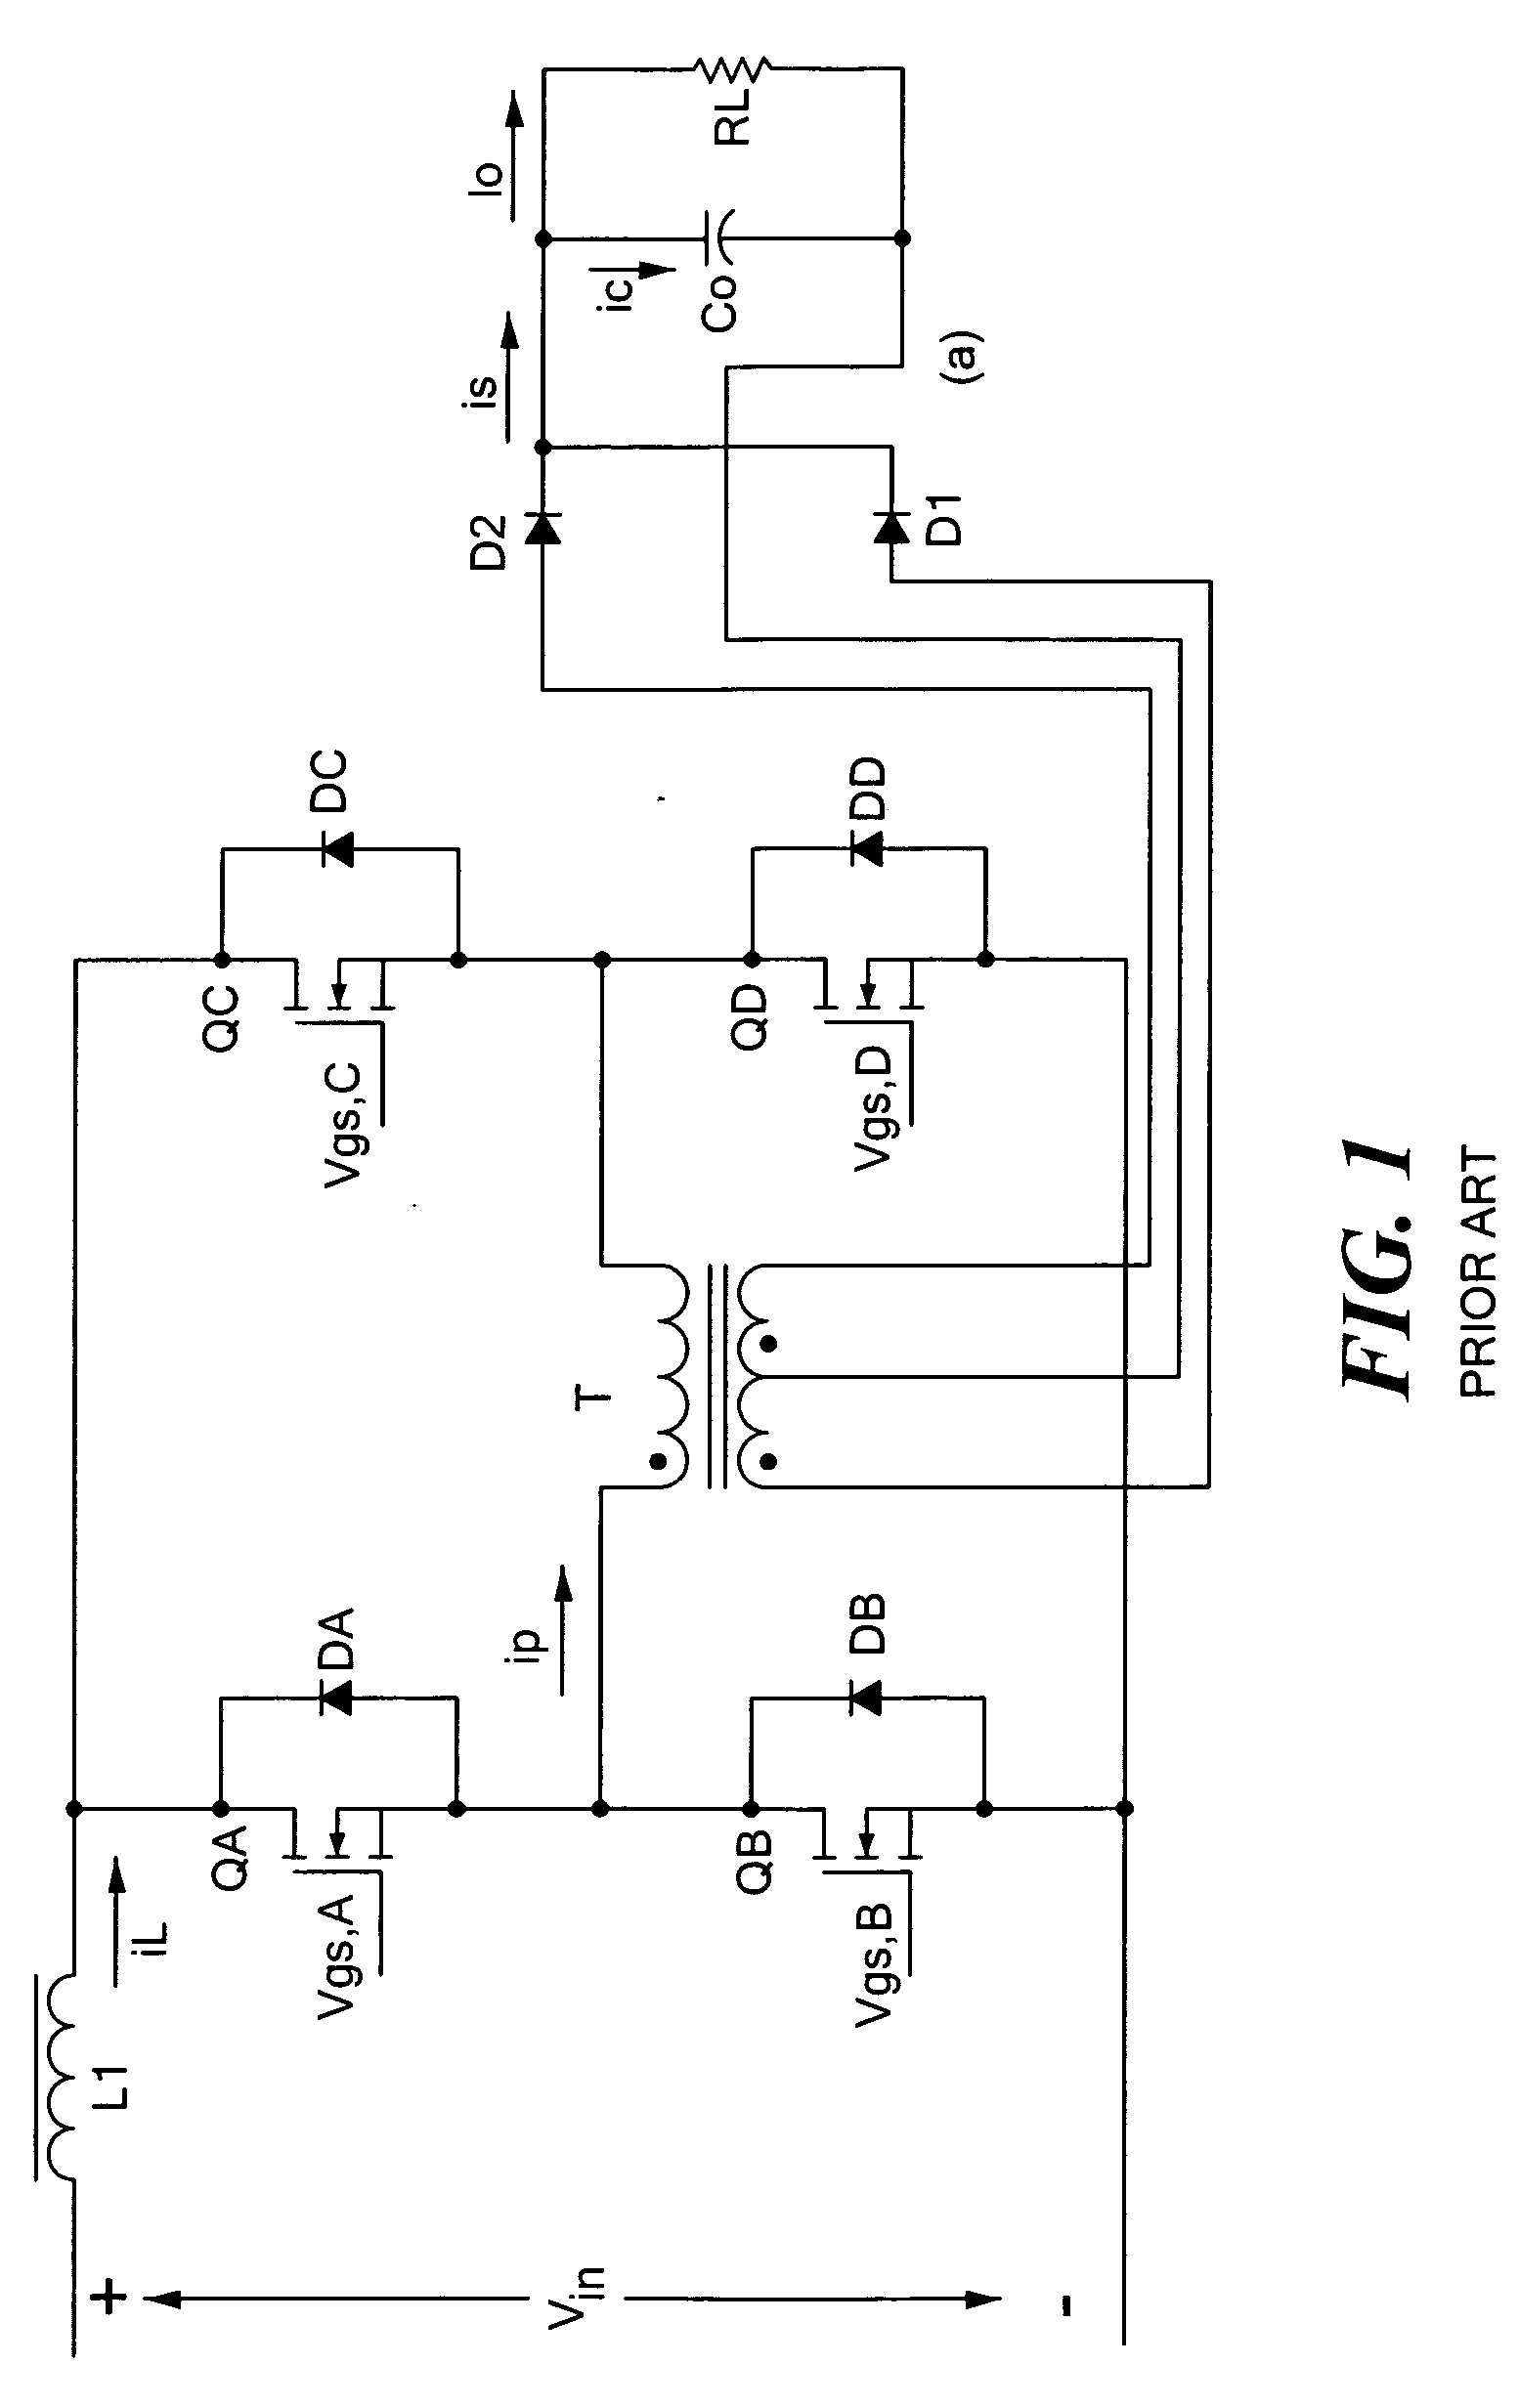 DC power converter and method of operation for continuous conduction mode